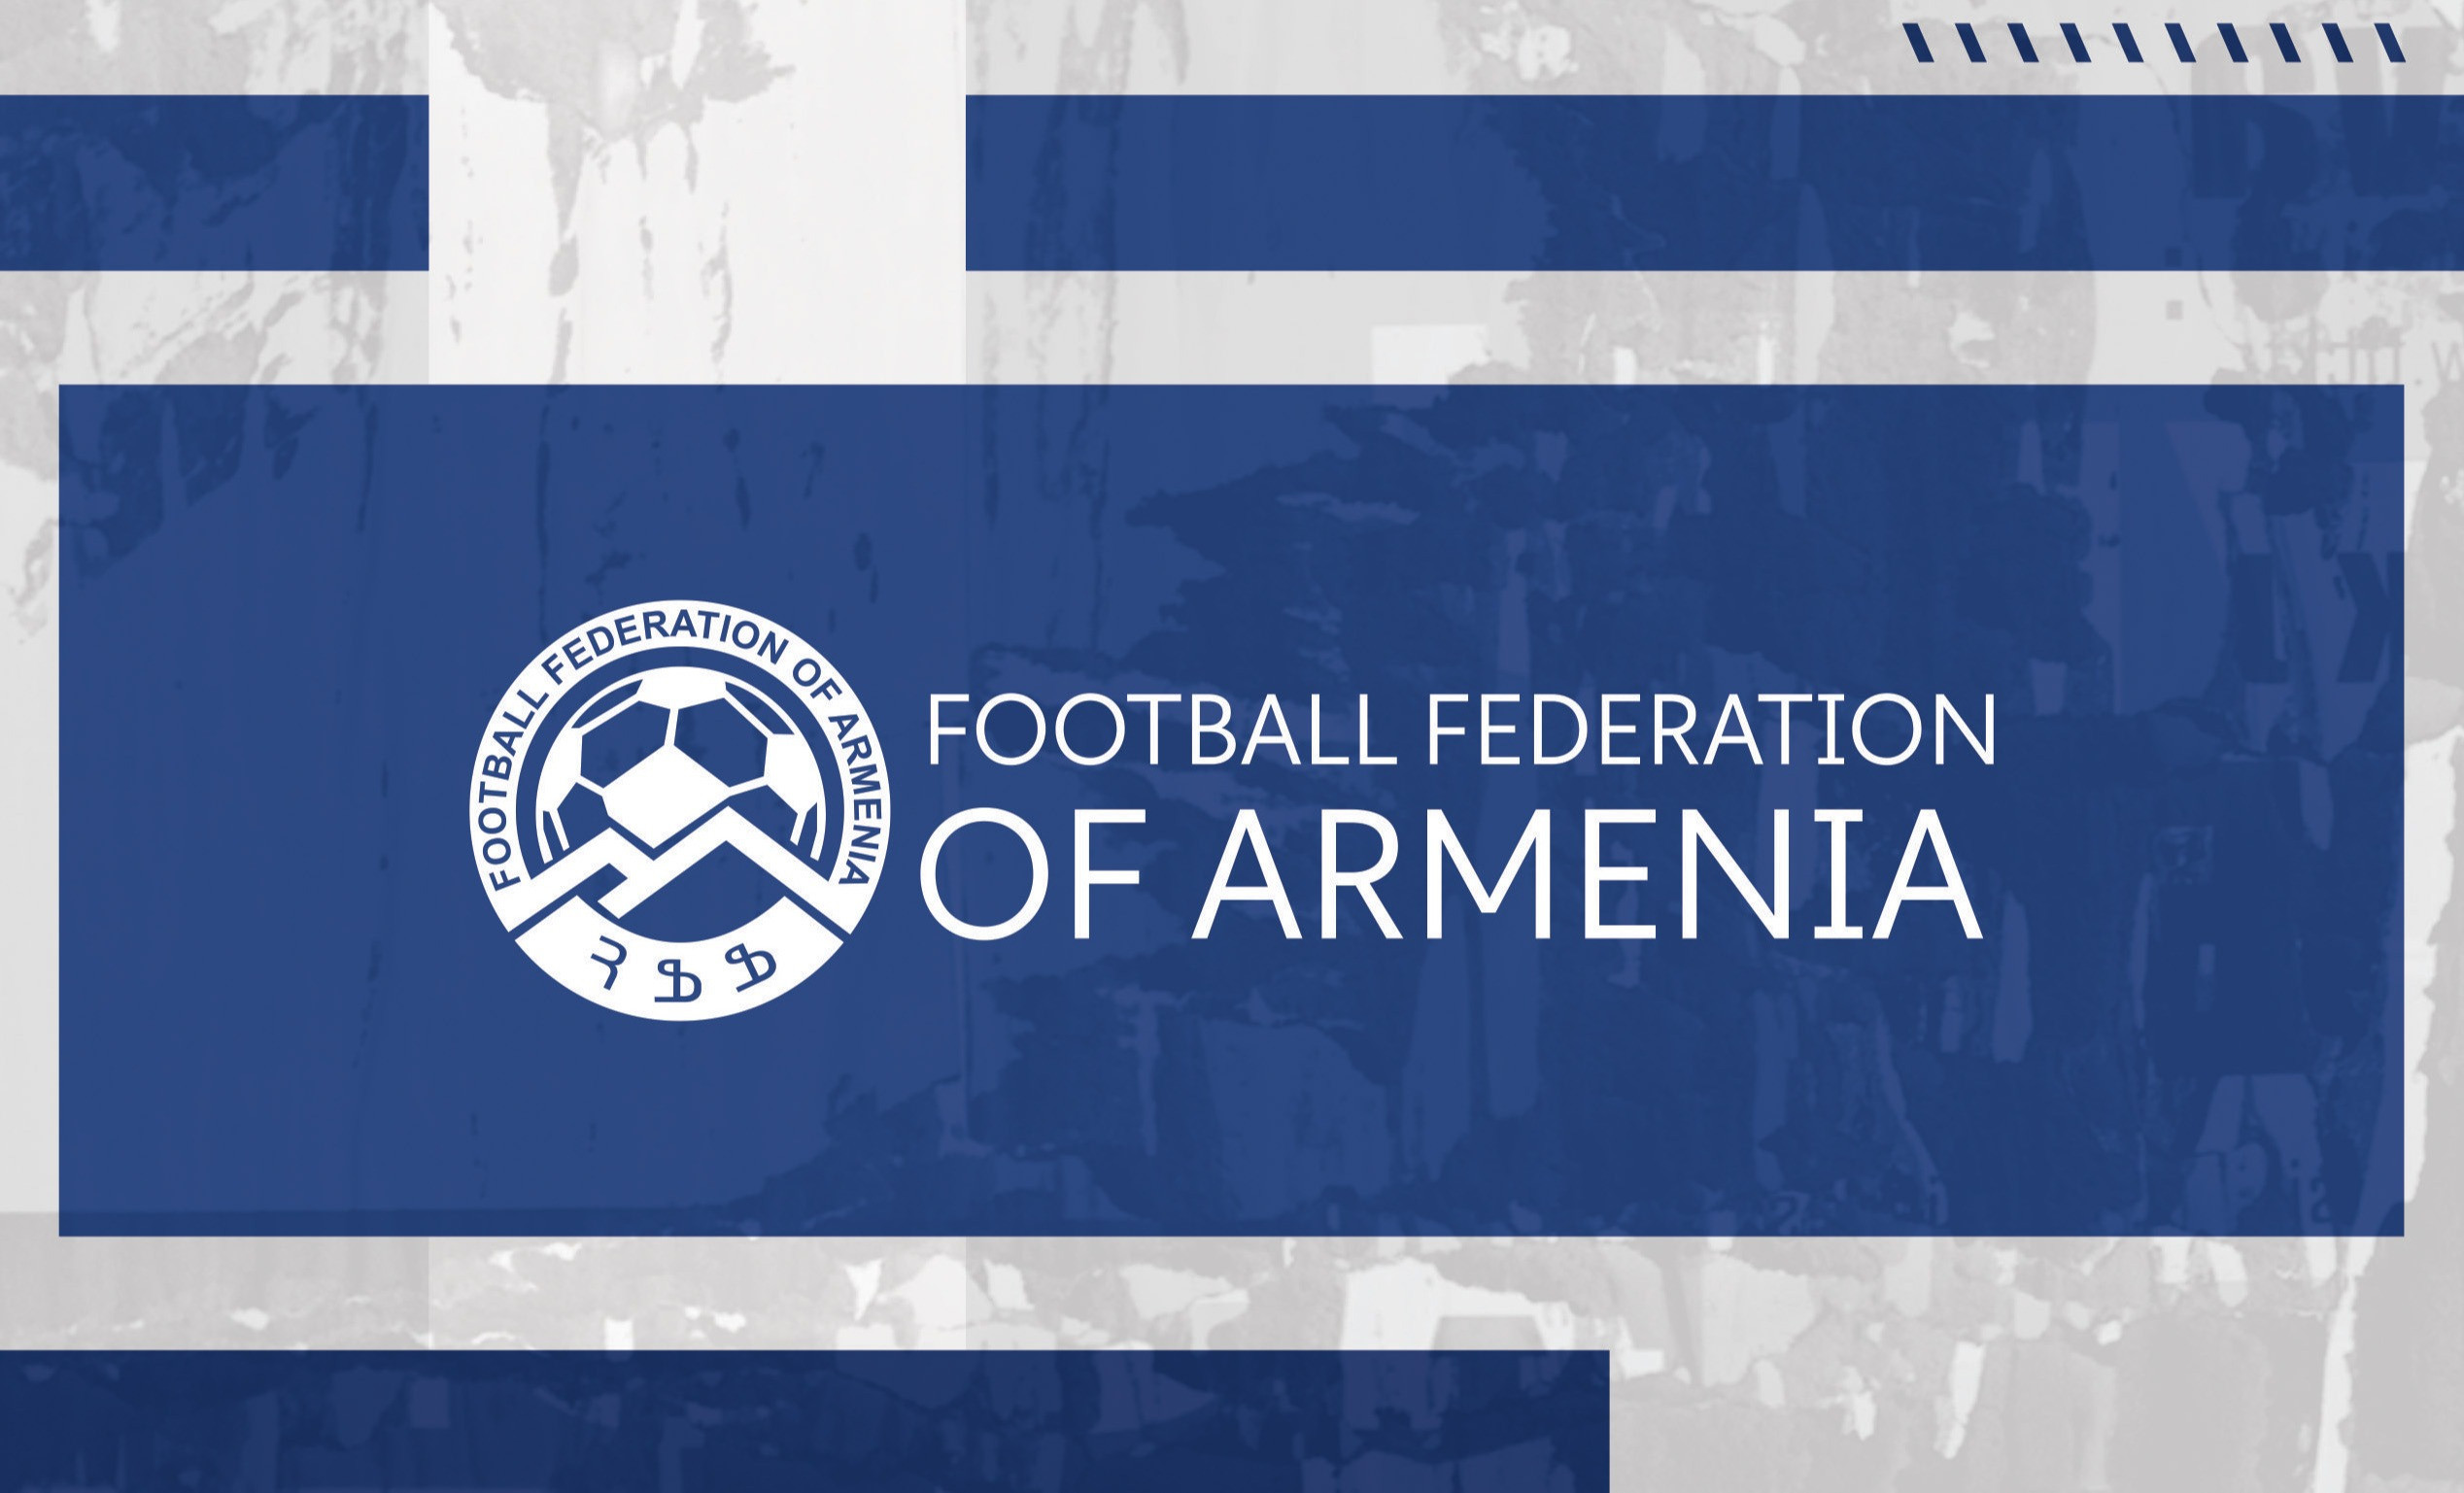 Armenian referees to officiate matches in Cyprus